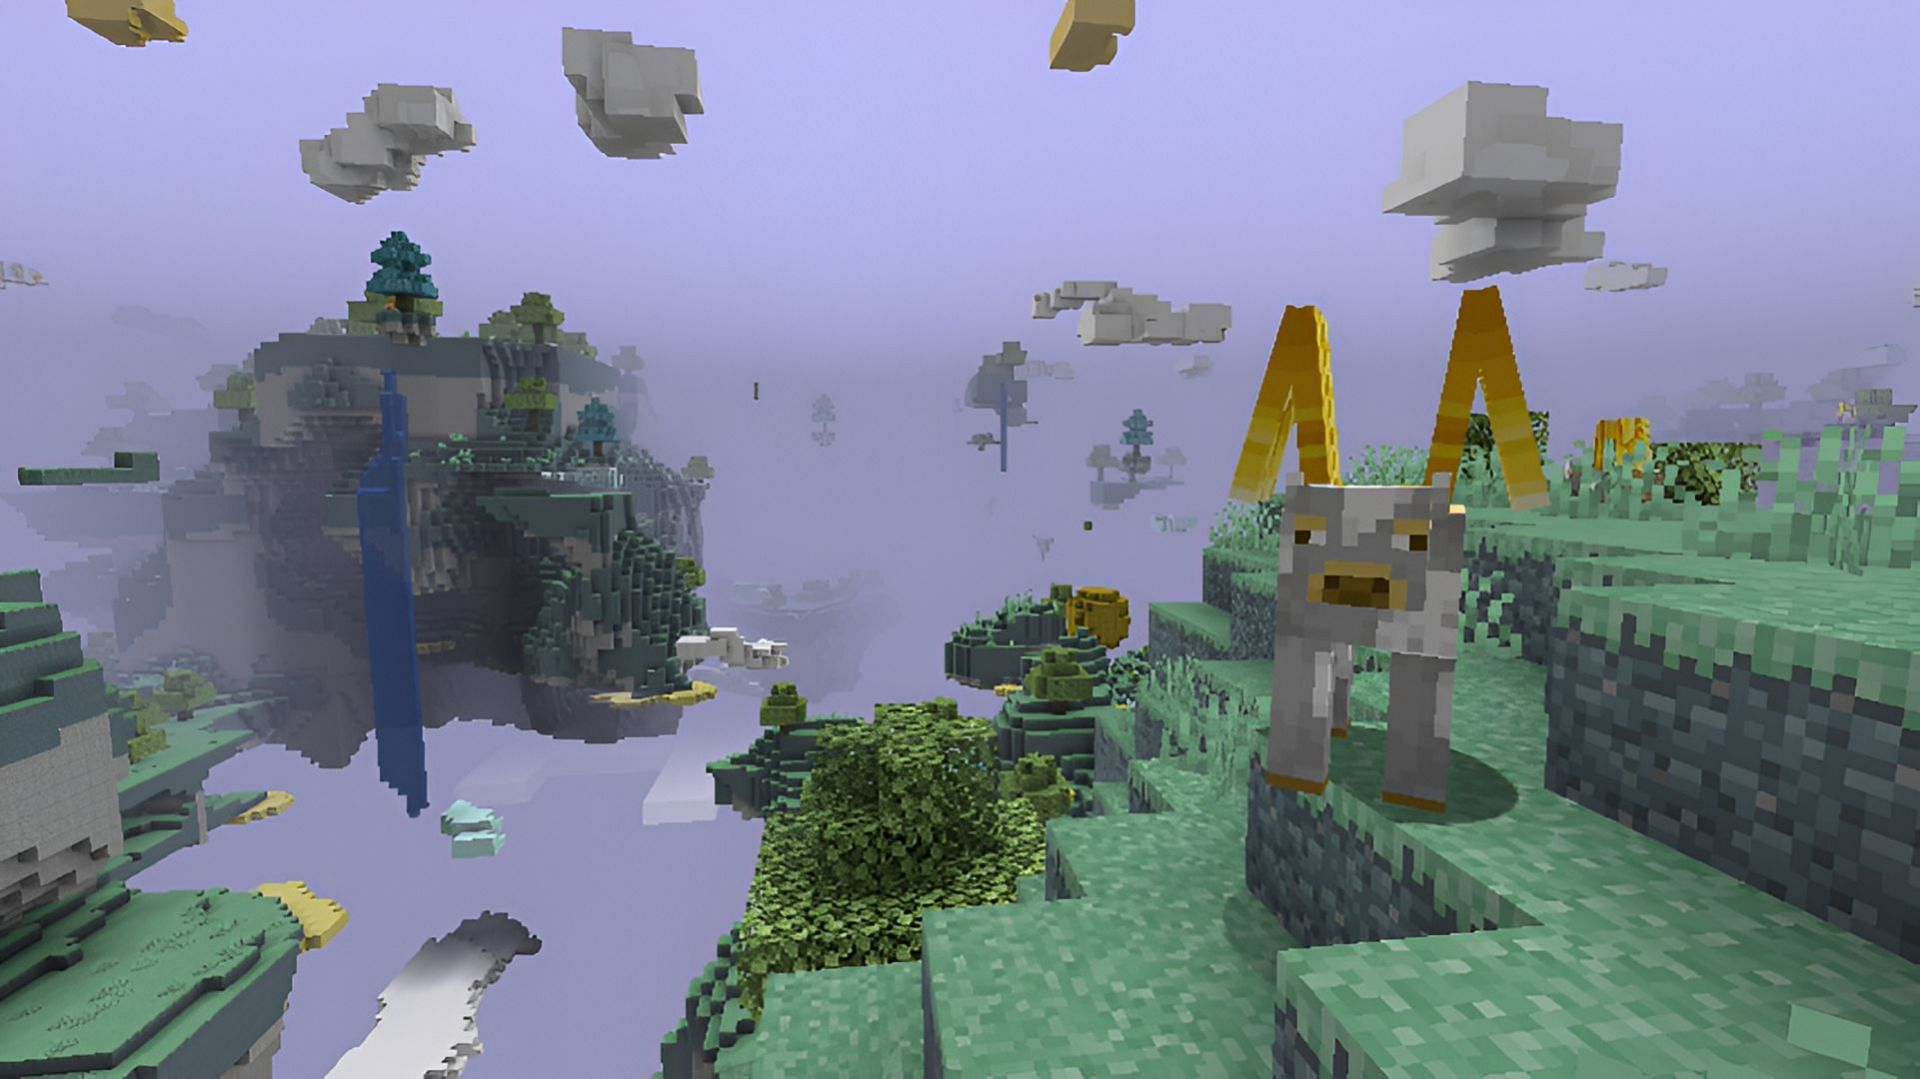 The Aether is one of the oldest Minecraft mods in the game